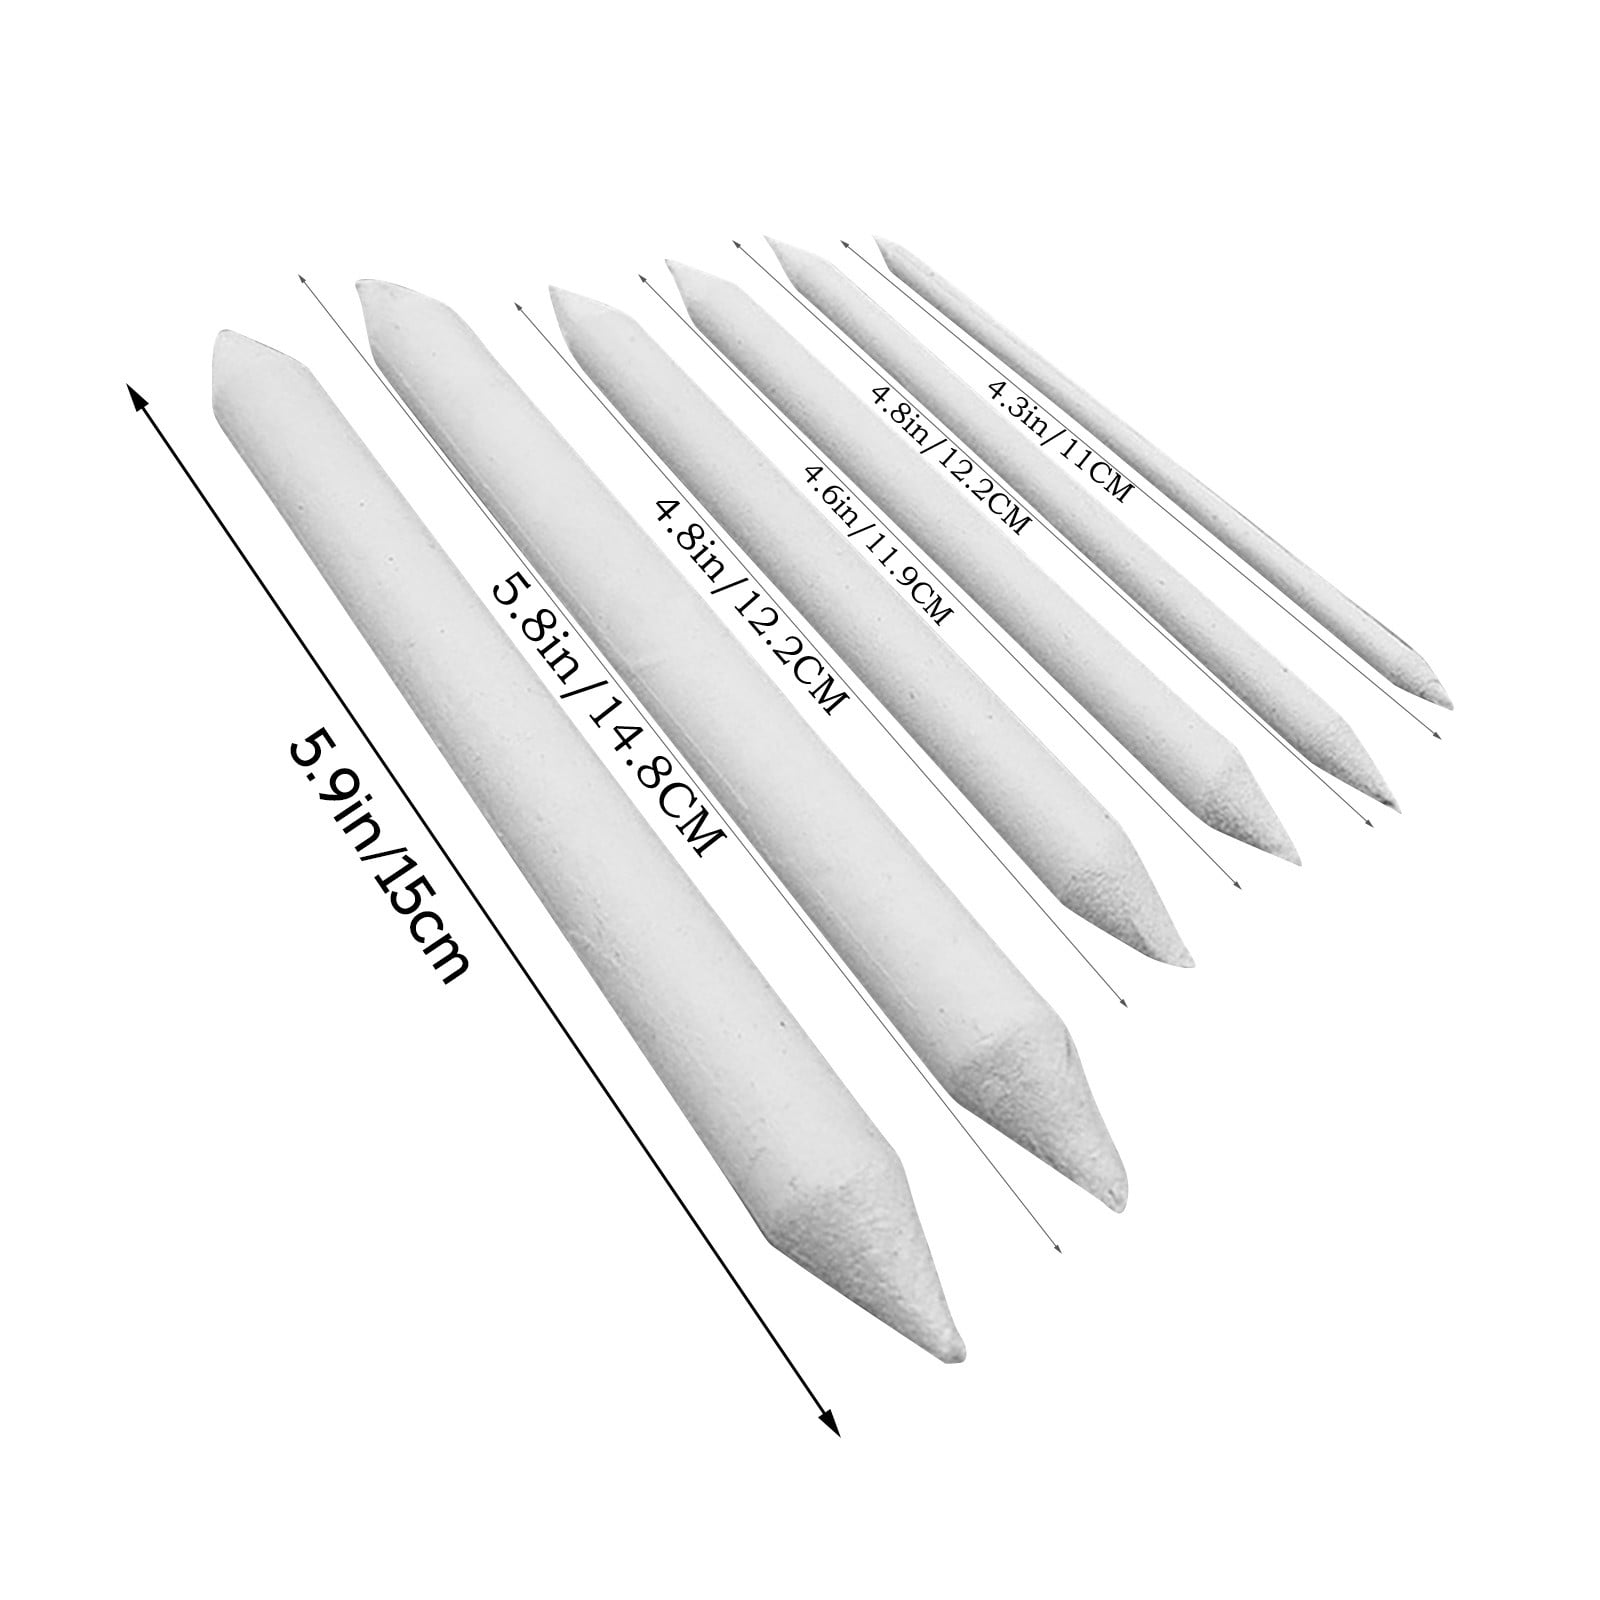 3pc Blending Stumps Dedicated Sketch Double Heads Paper Pen White Pen Sketch Paper Wiper Rice Paper Correction Pen for Student Sketch Drawing